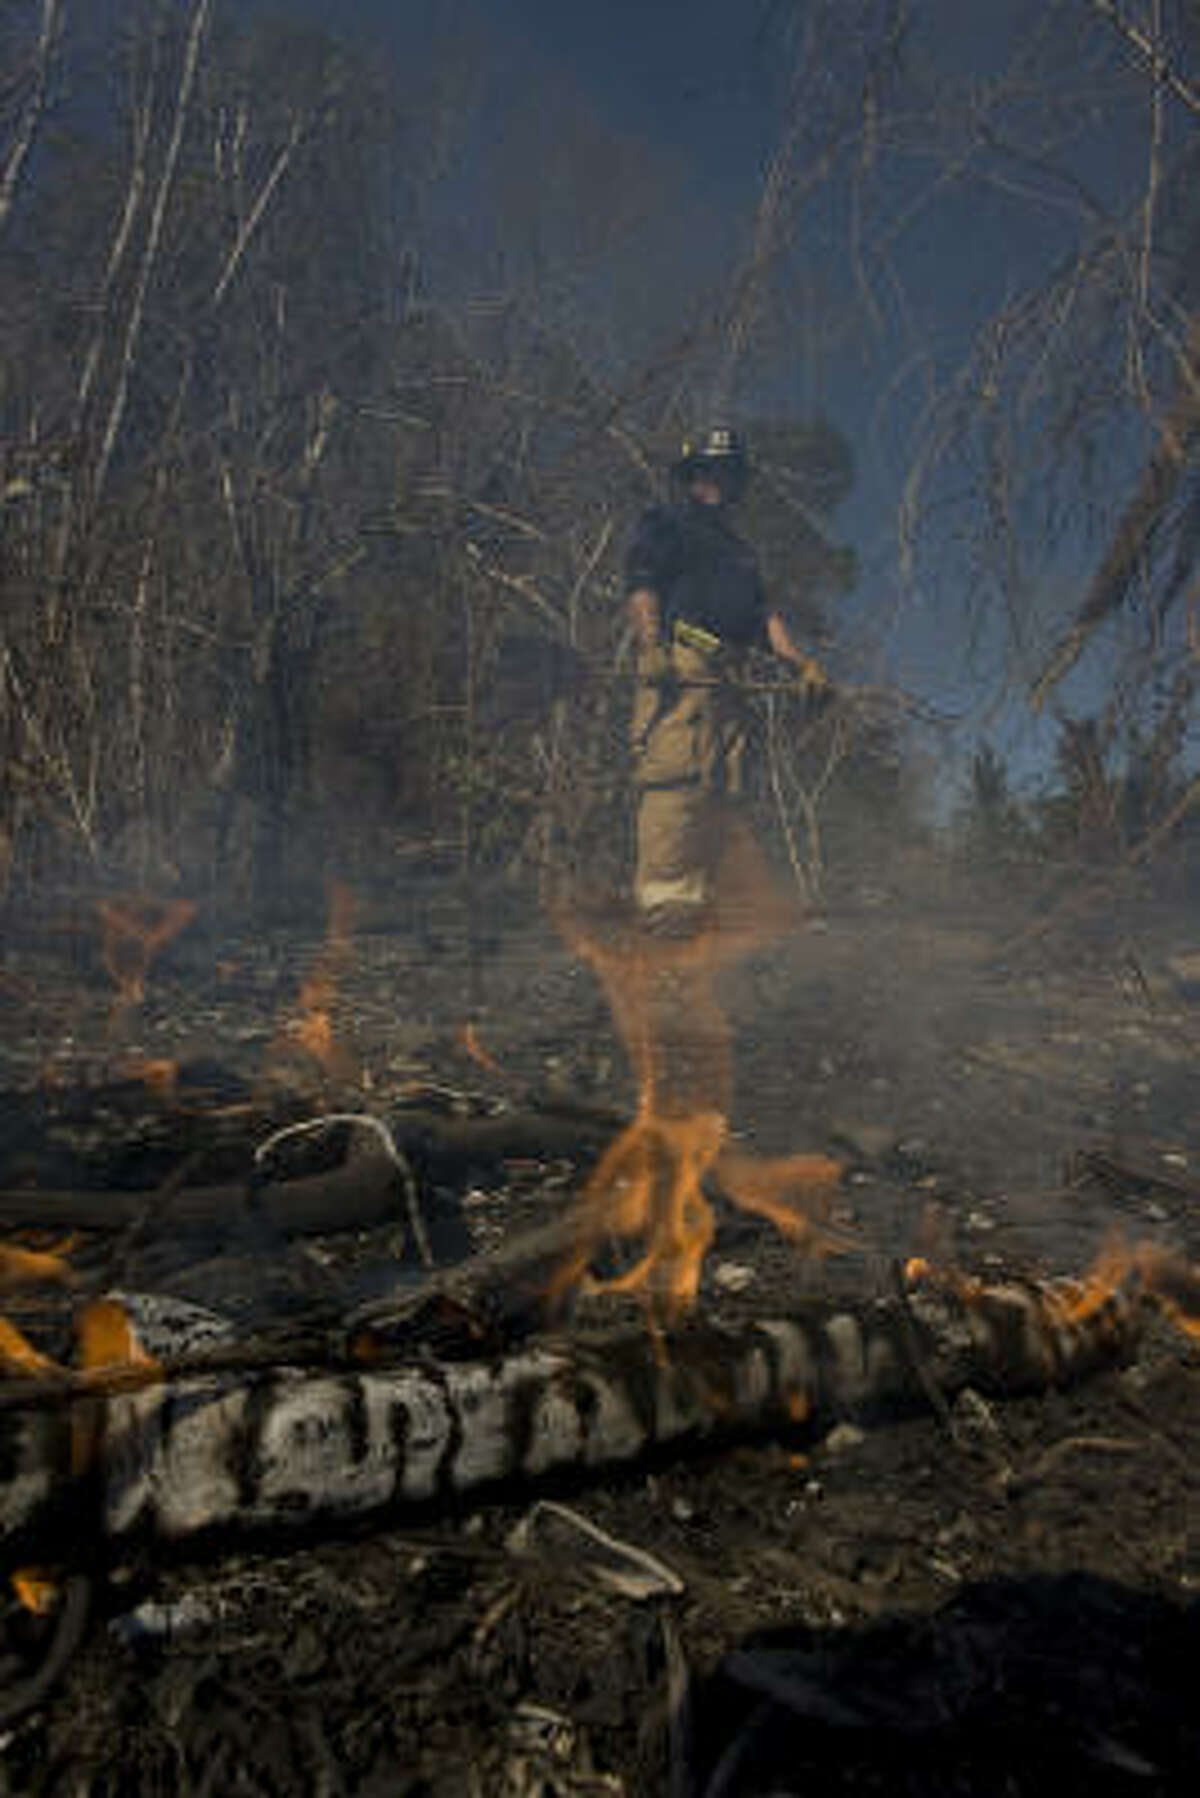 Houston firefighter Trey Bourgeois works on putting out a grass fire across from T.C. Jester Park in Houston. Firefighters were battling flames from a fire that started the night before.